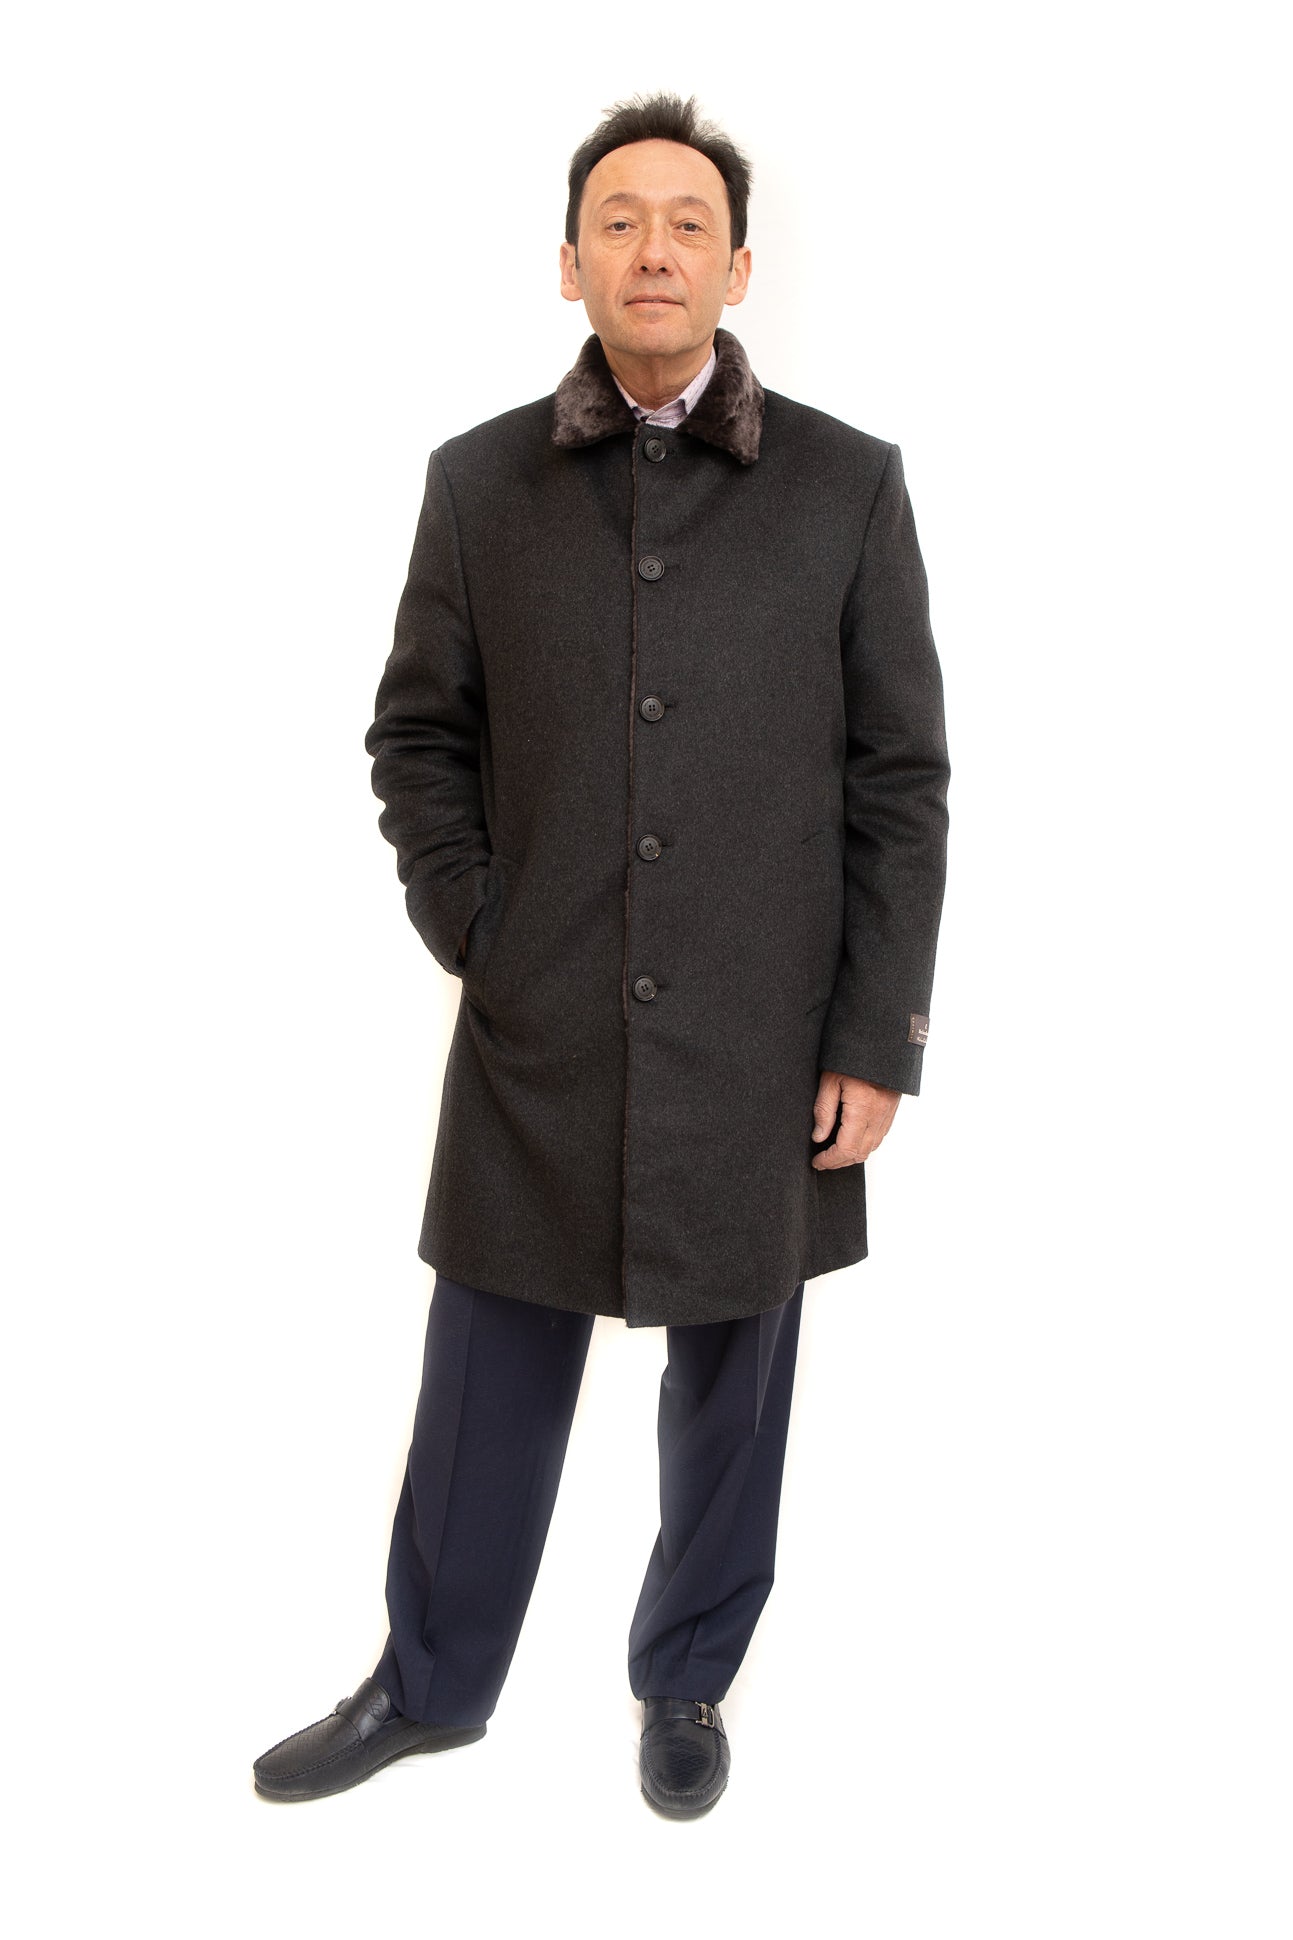 cashmere wool coat with fur collar at vollbracht furs in cleveland, ohio